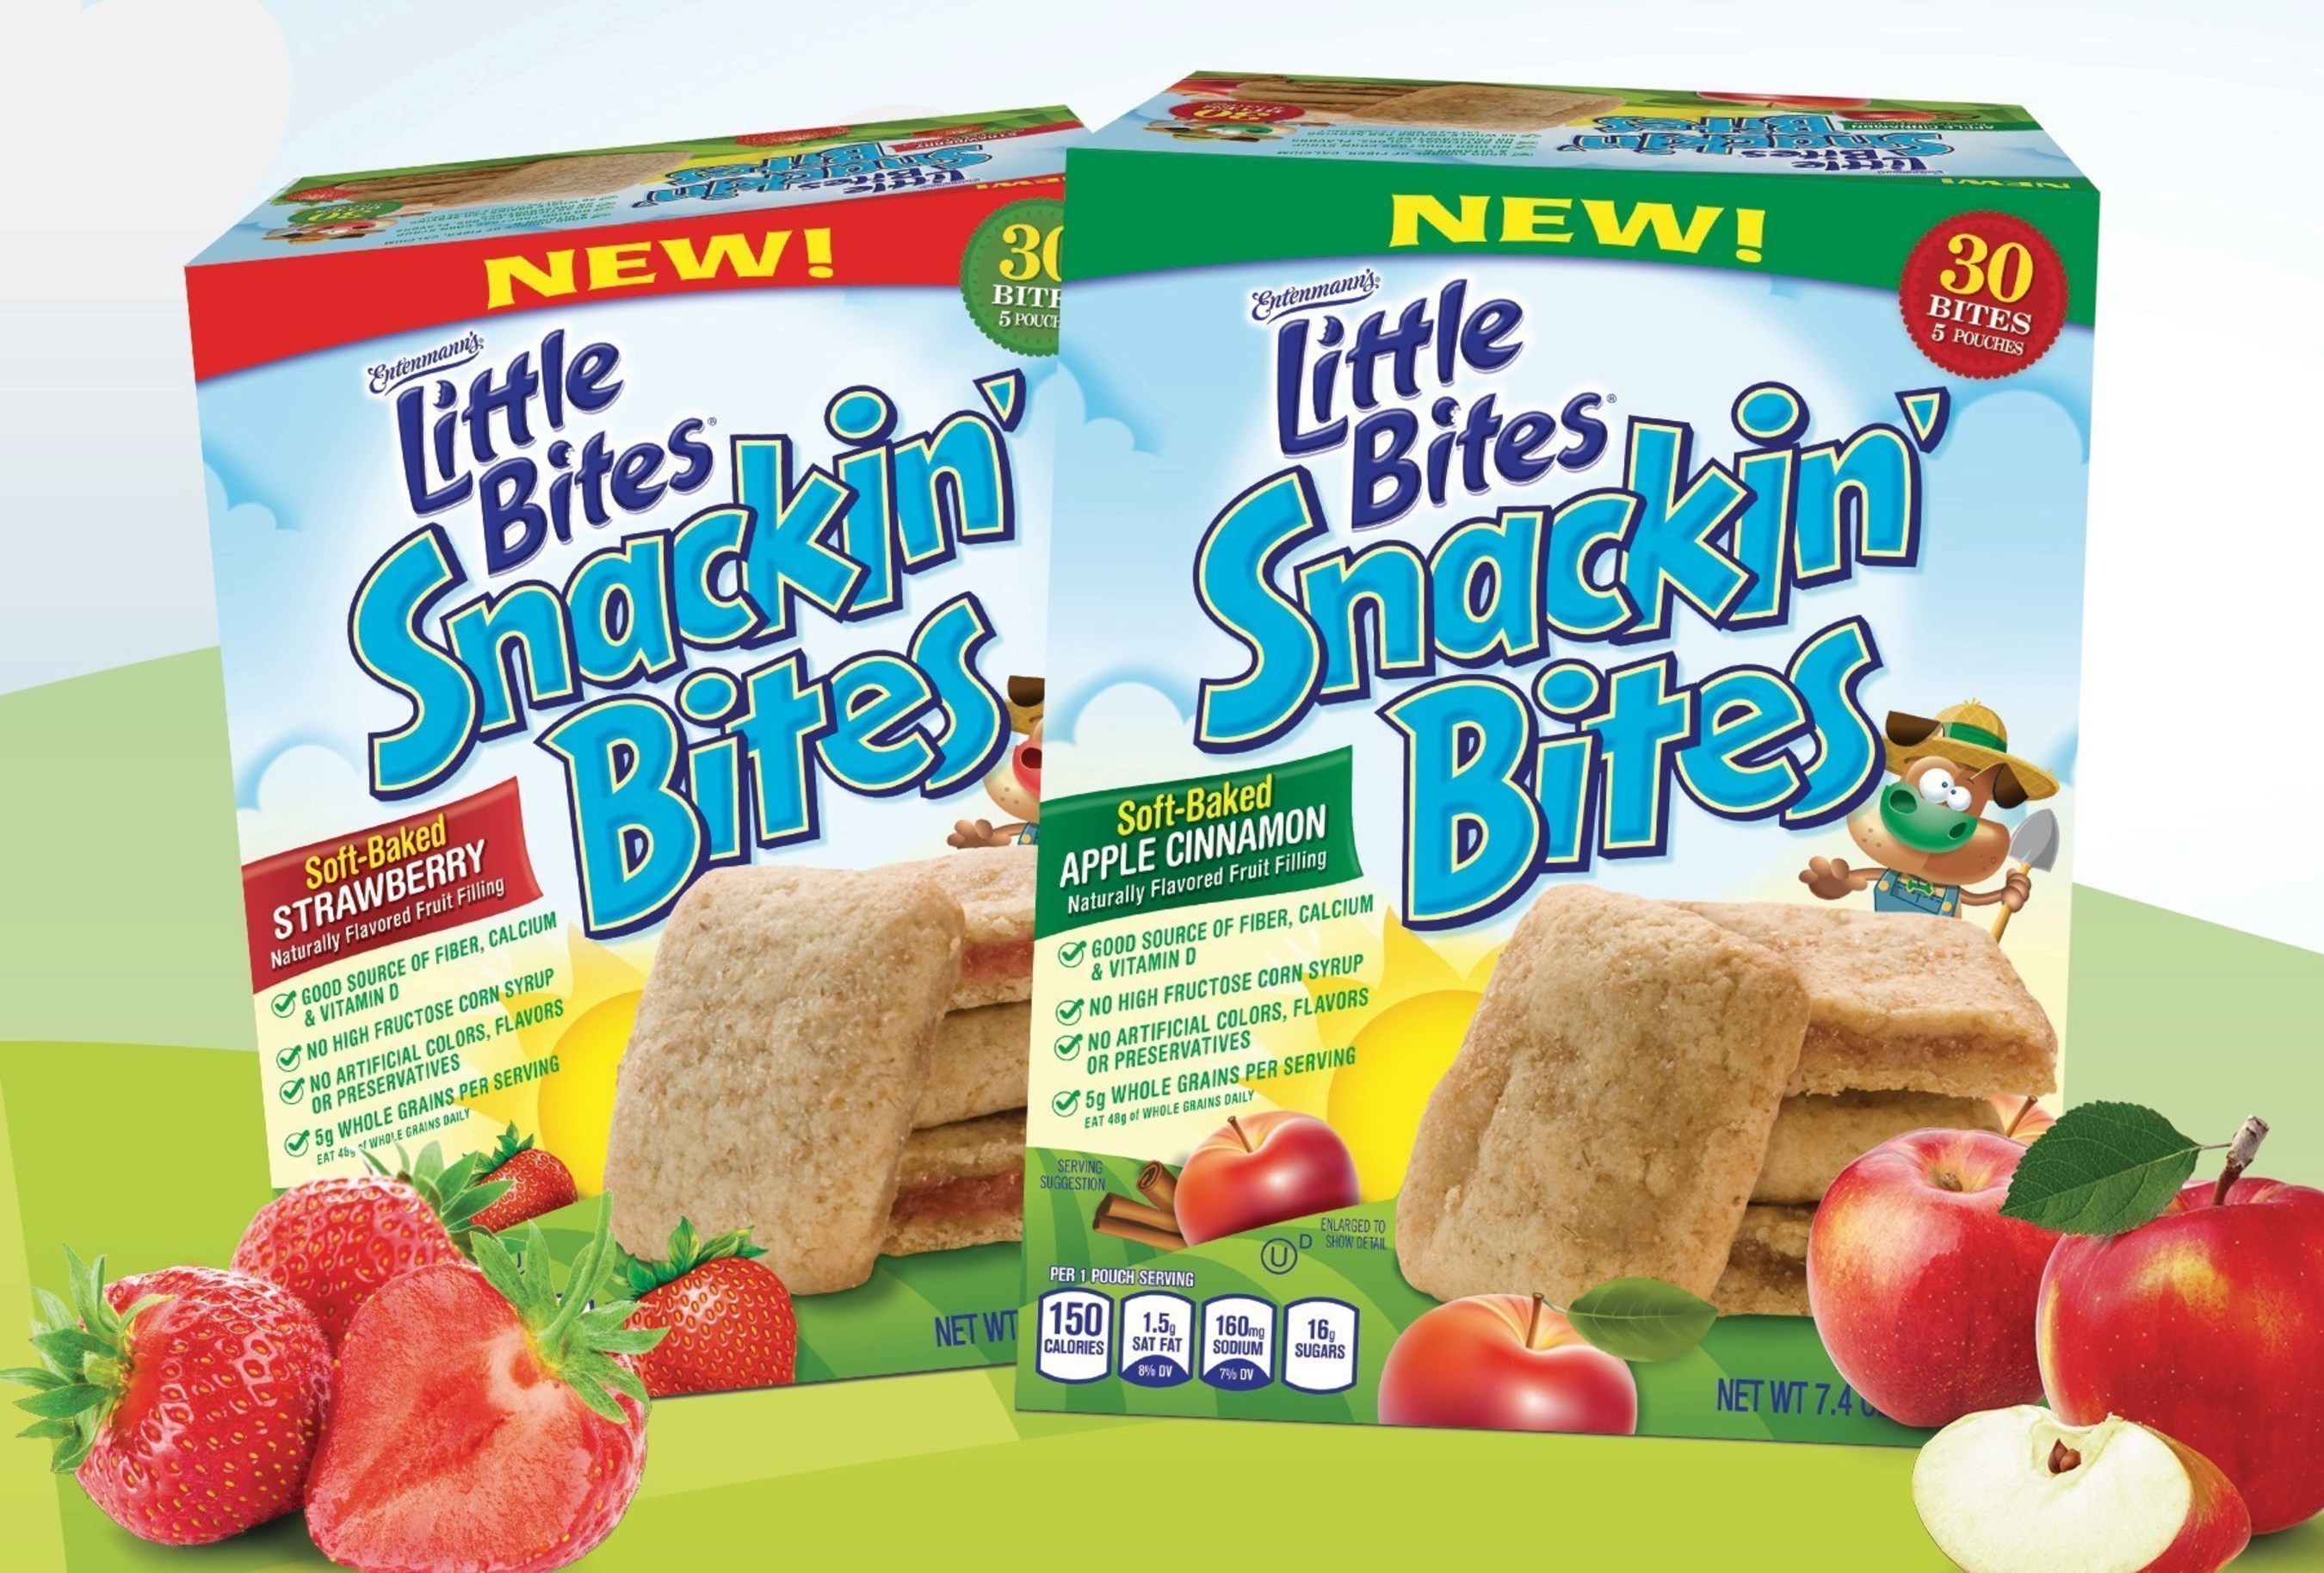 Introducing Little Bites(R) Snackin' Bites Bites Apple Cinnamon and Strawberry flavors, portable pre-packaged mini bars for families' on-the-go-needs.